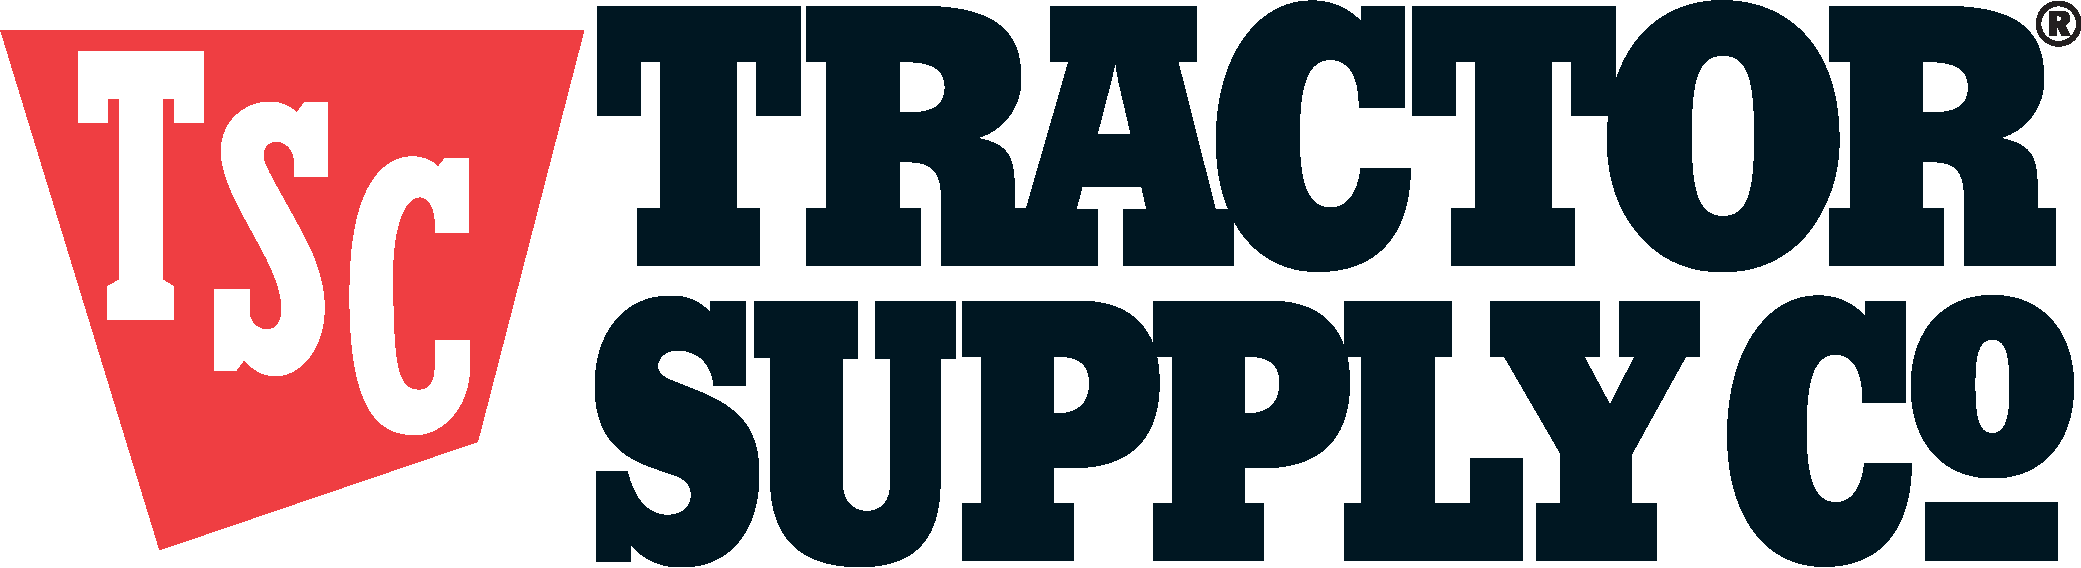 Tractor Supply Company Foundation Makes $300,000 Commitment to Support Conservation Efforts